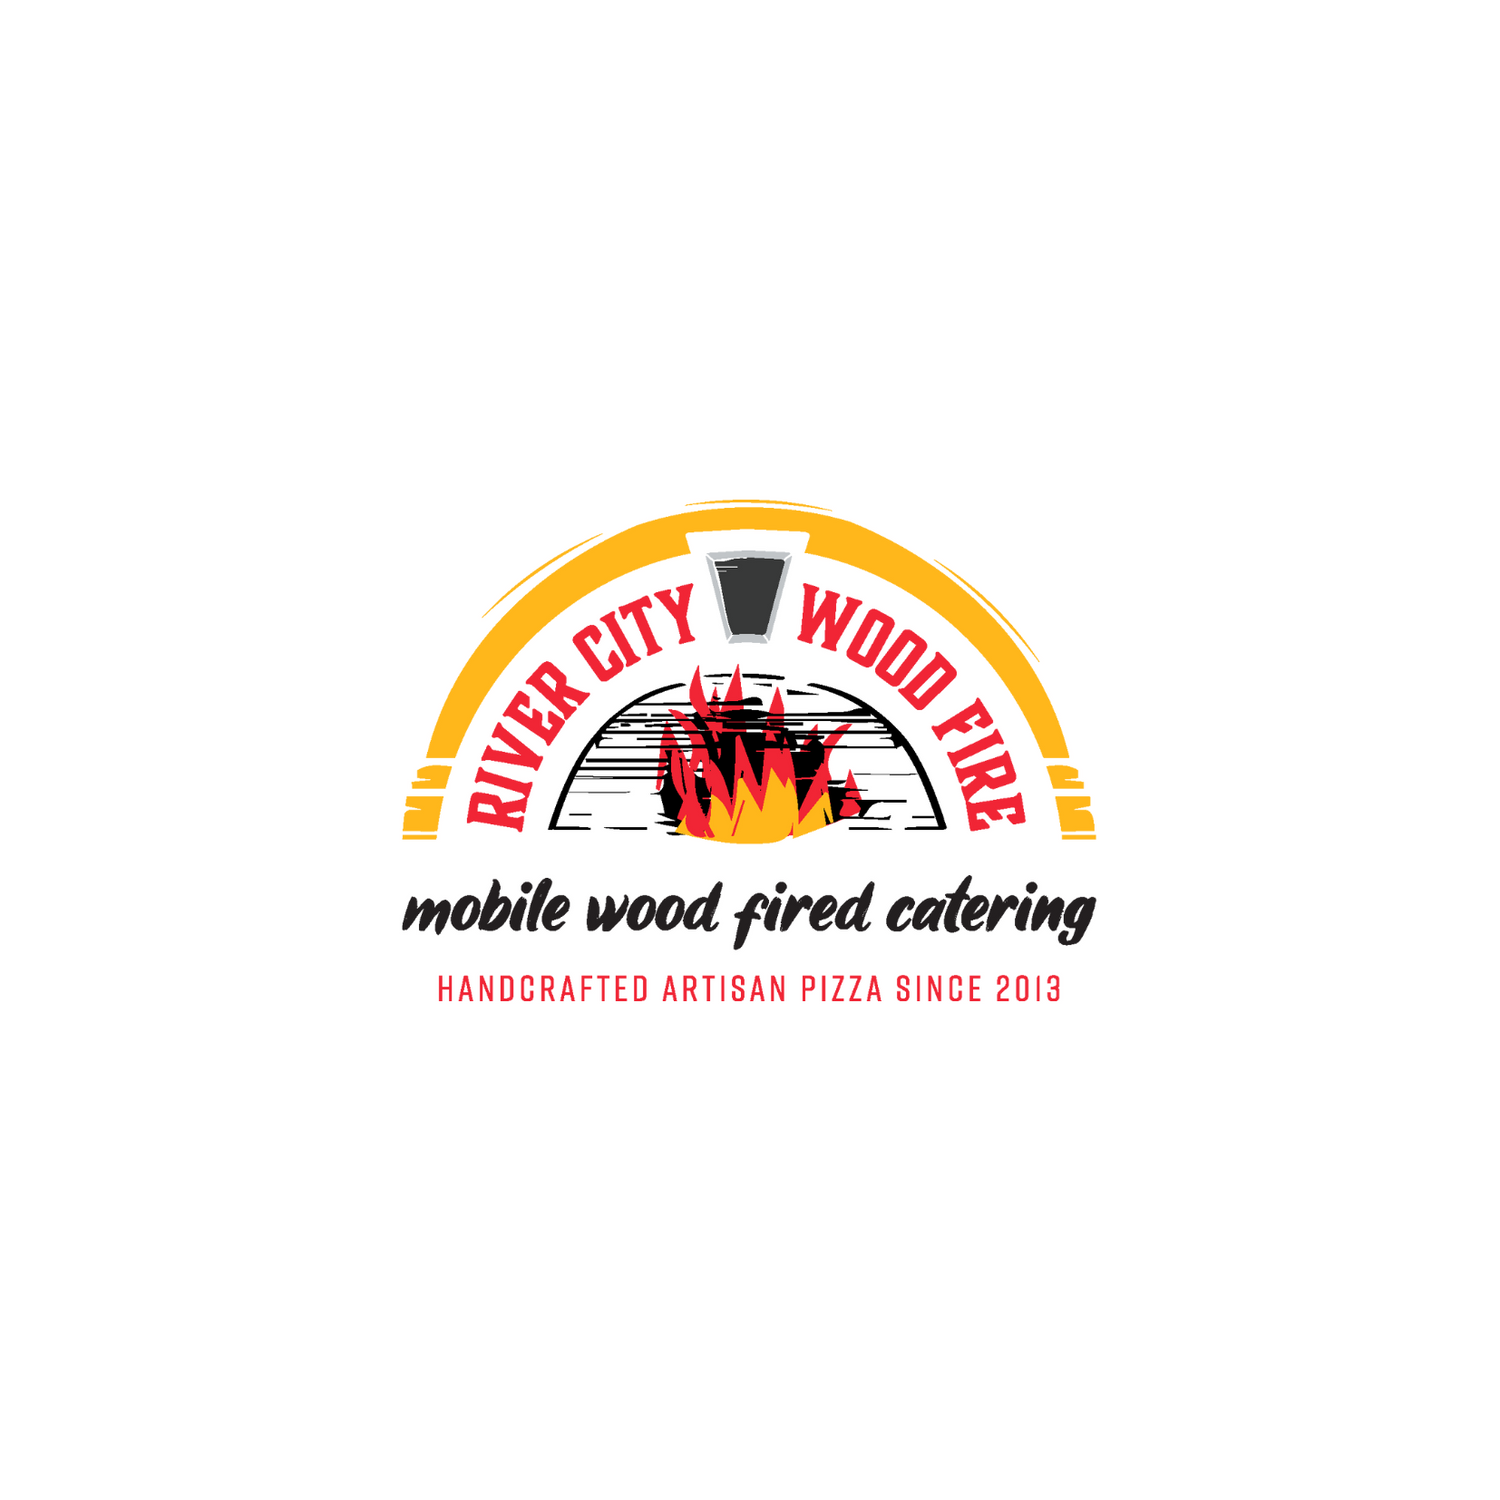 River City Wood Fire Pizza